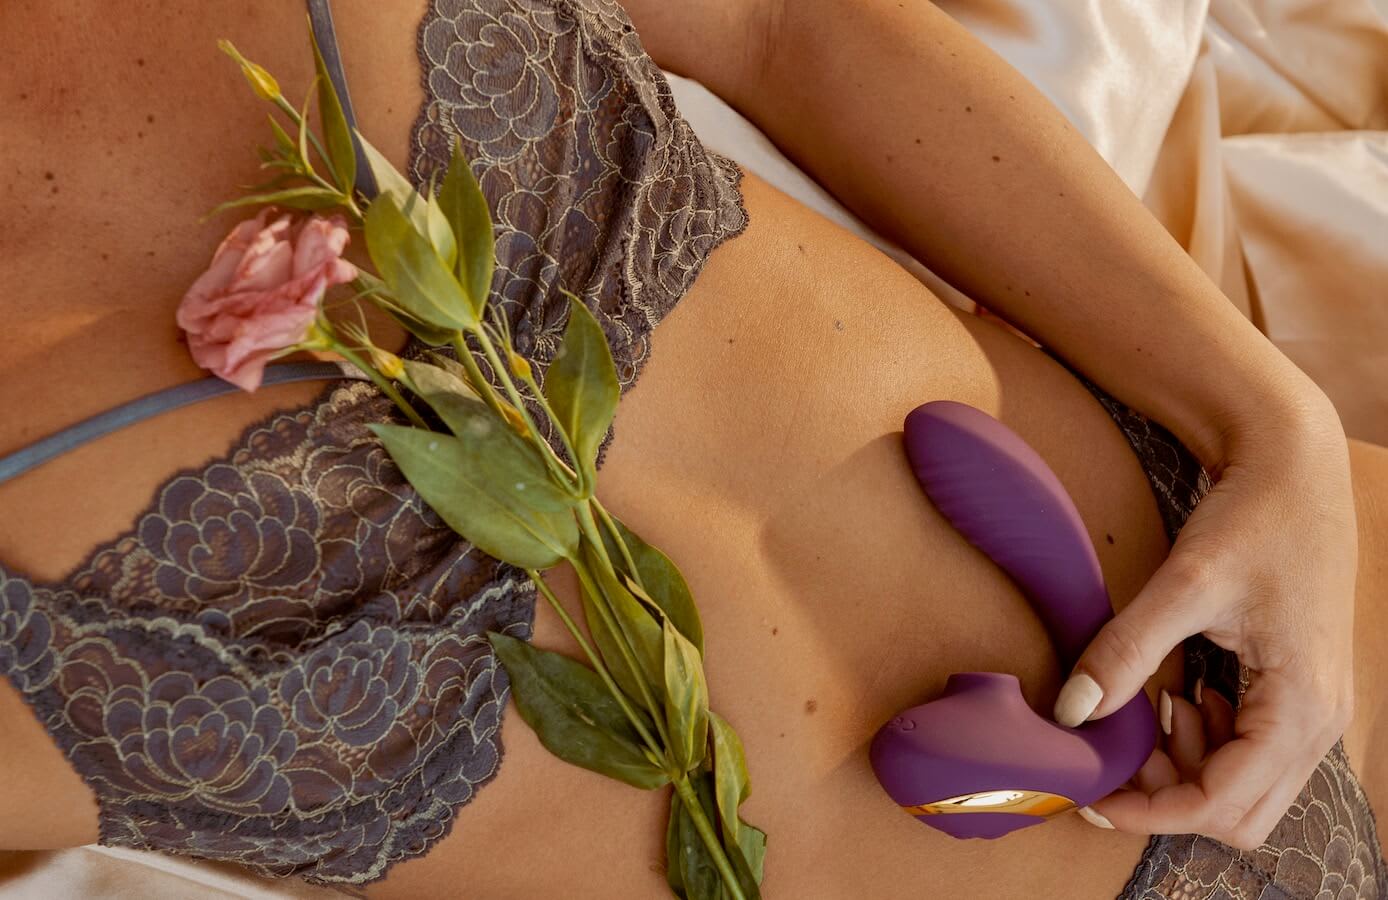 15 amazing sex toys to treat yourself to this Valentine's Day | Bellesa -  Porn for Women